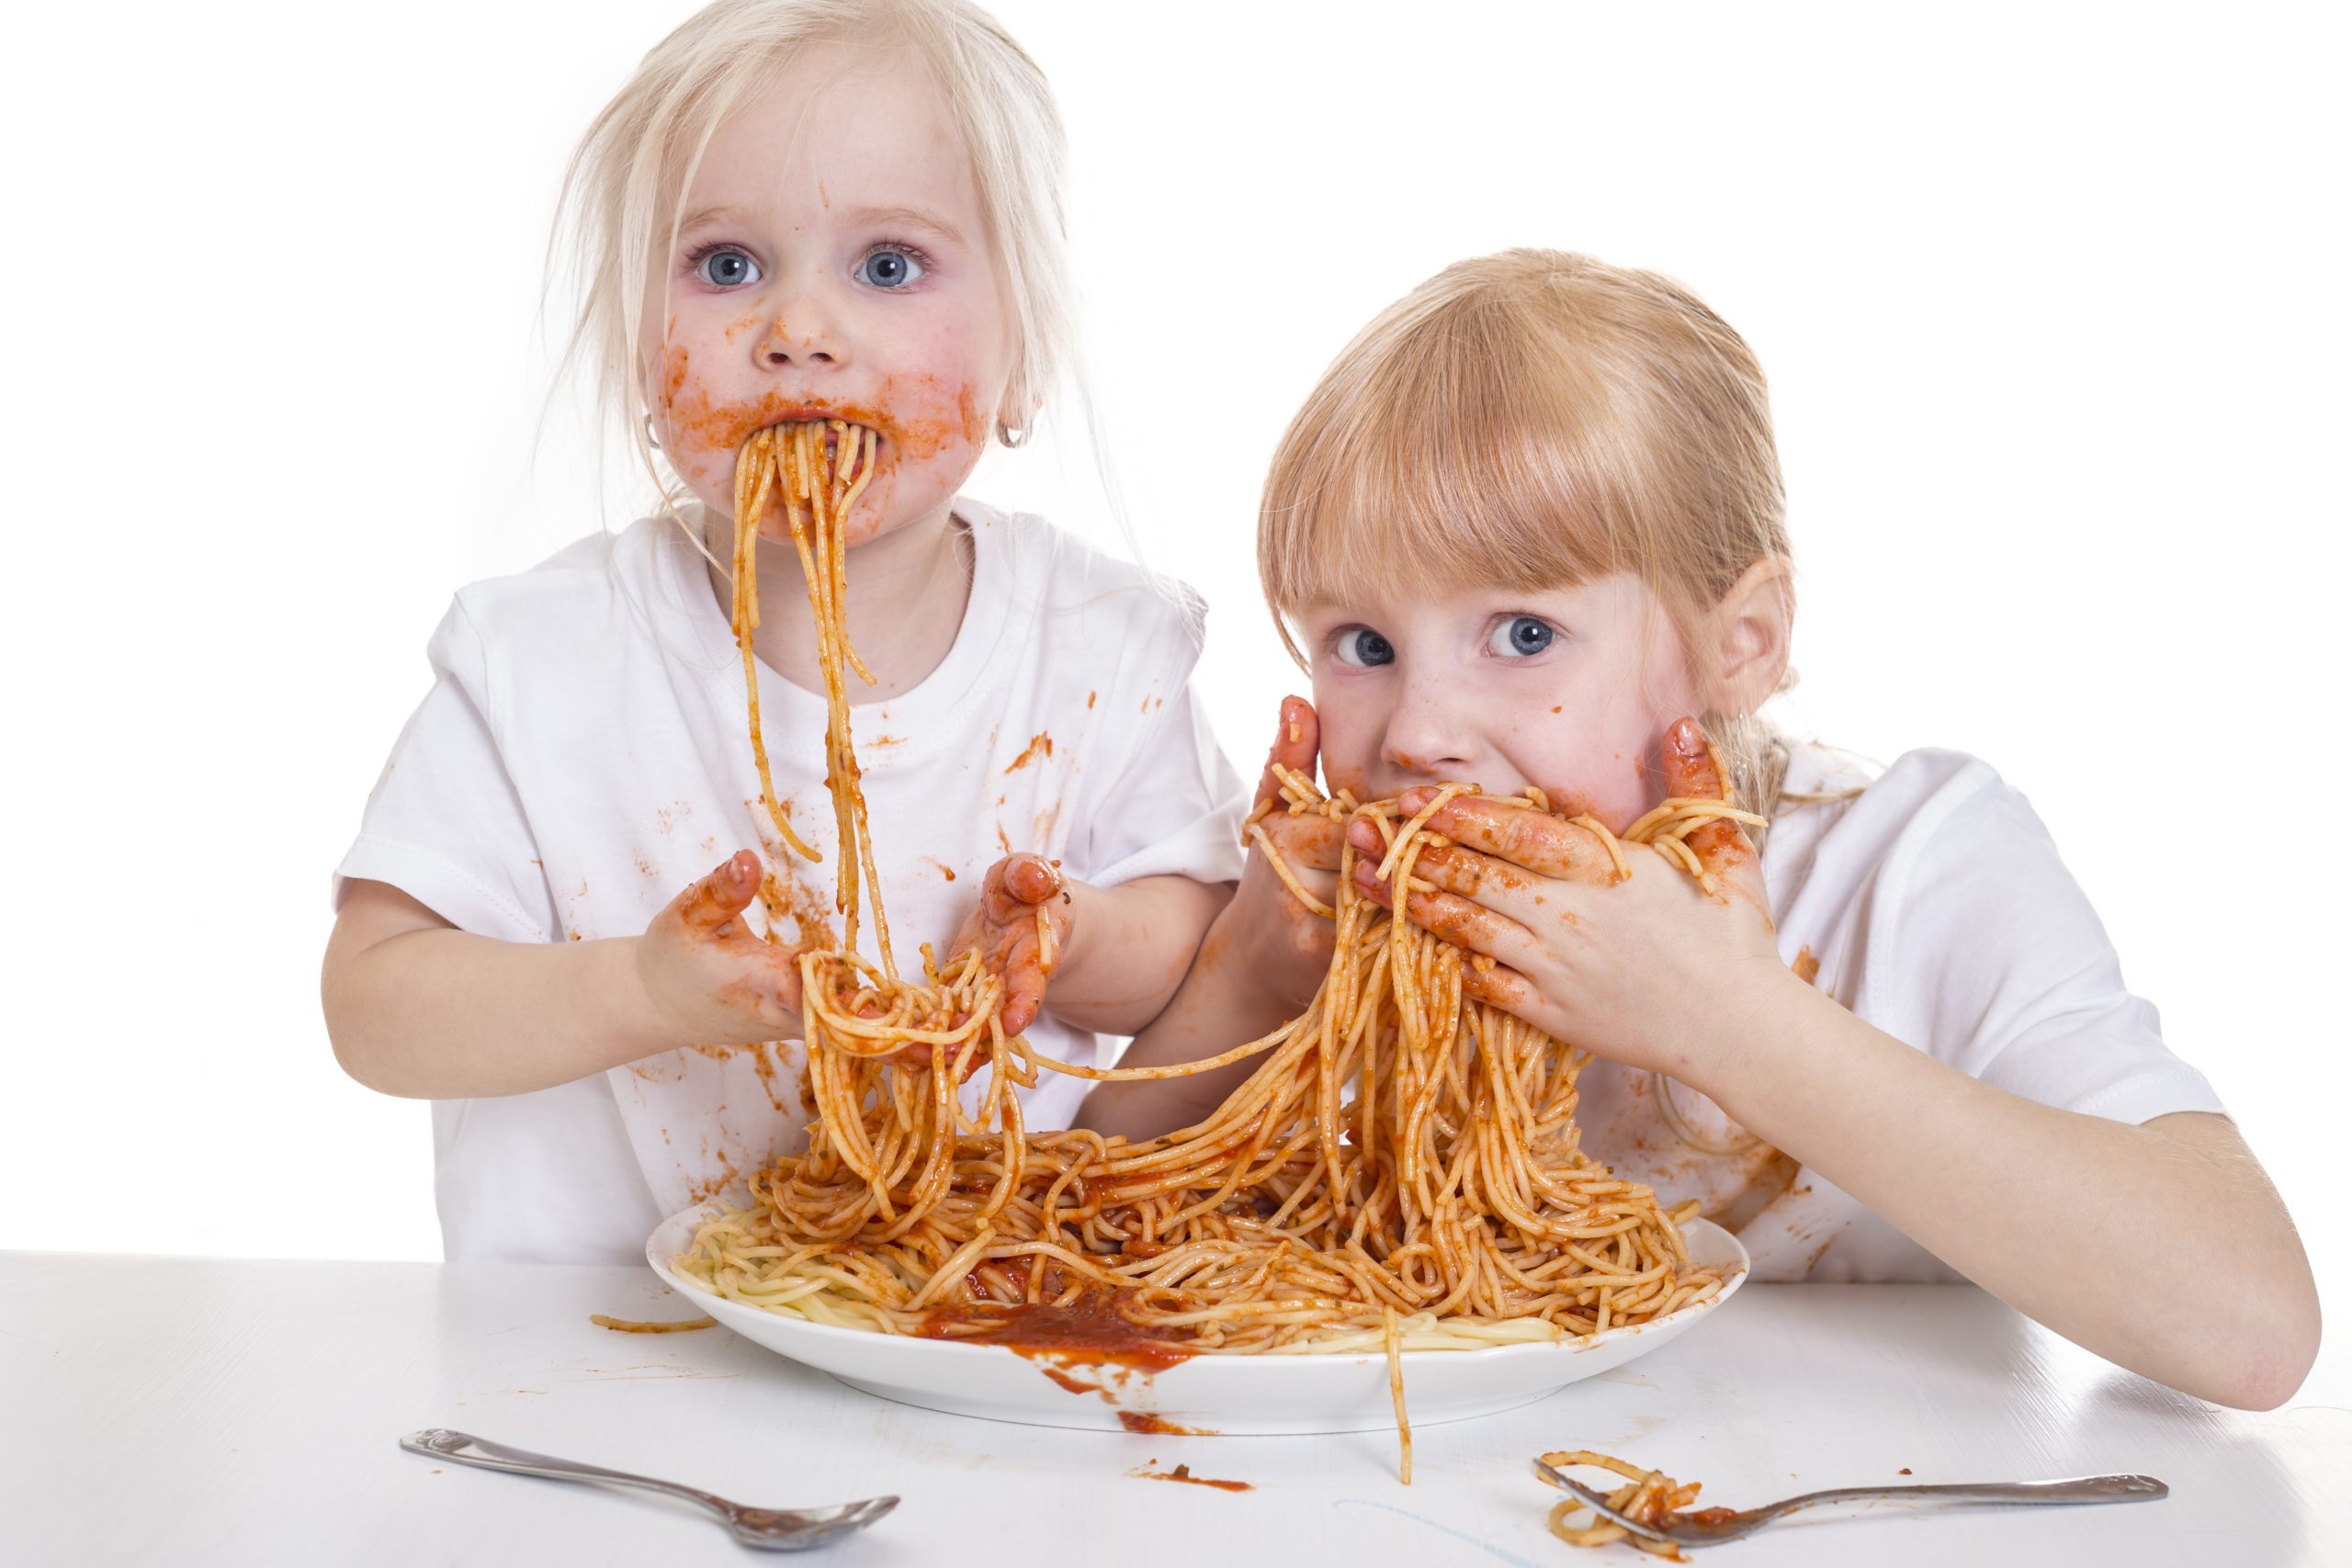 A Quick and Easy Way to Teach Table Manners at Home